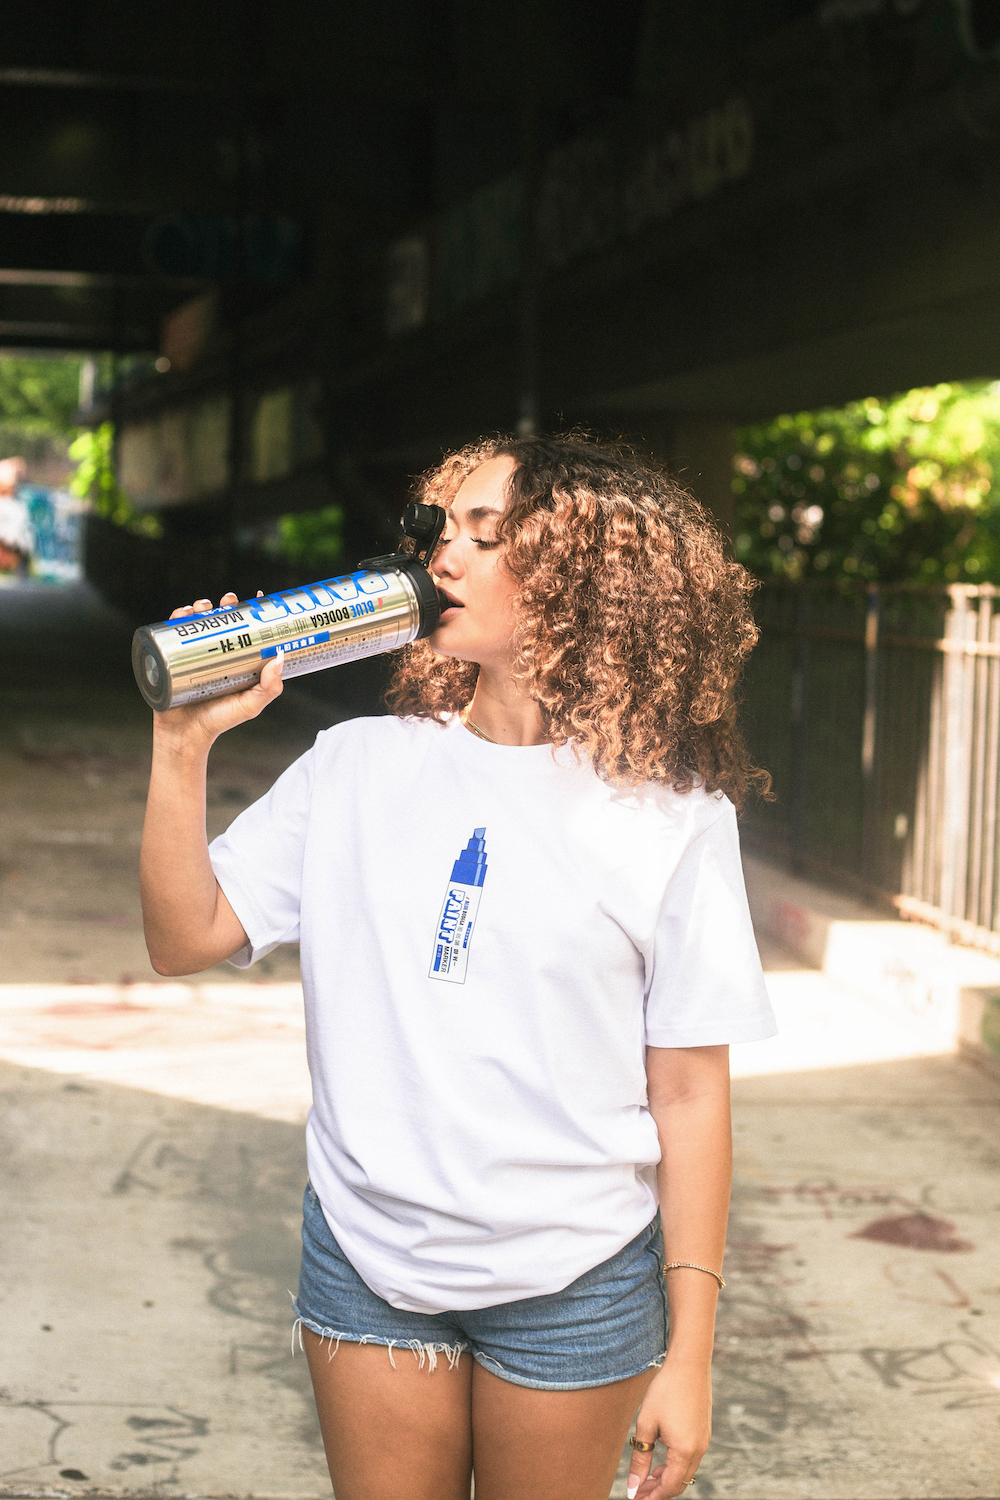 A model drinks from a Blue Bodega bottle that resembles a paint marker